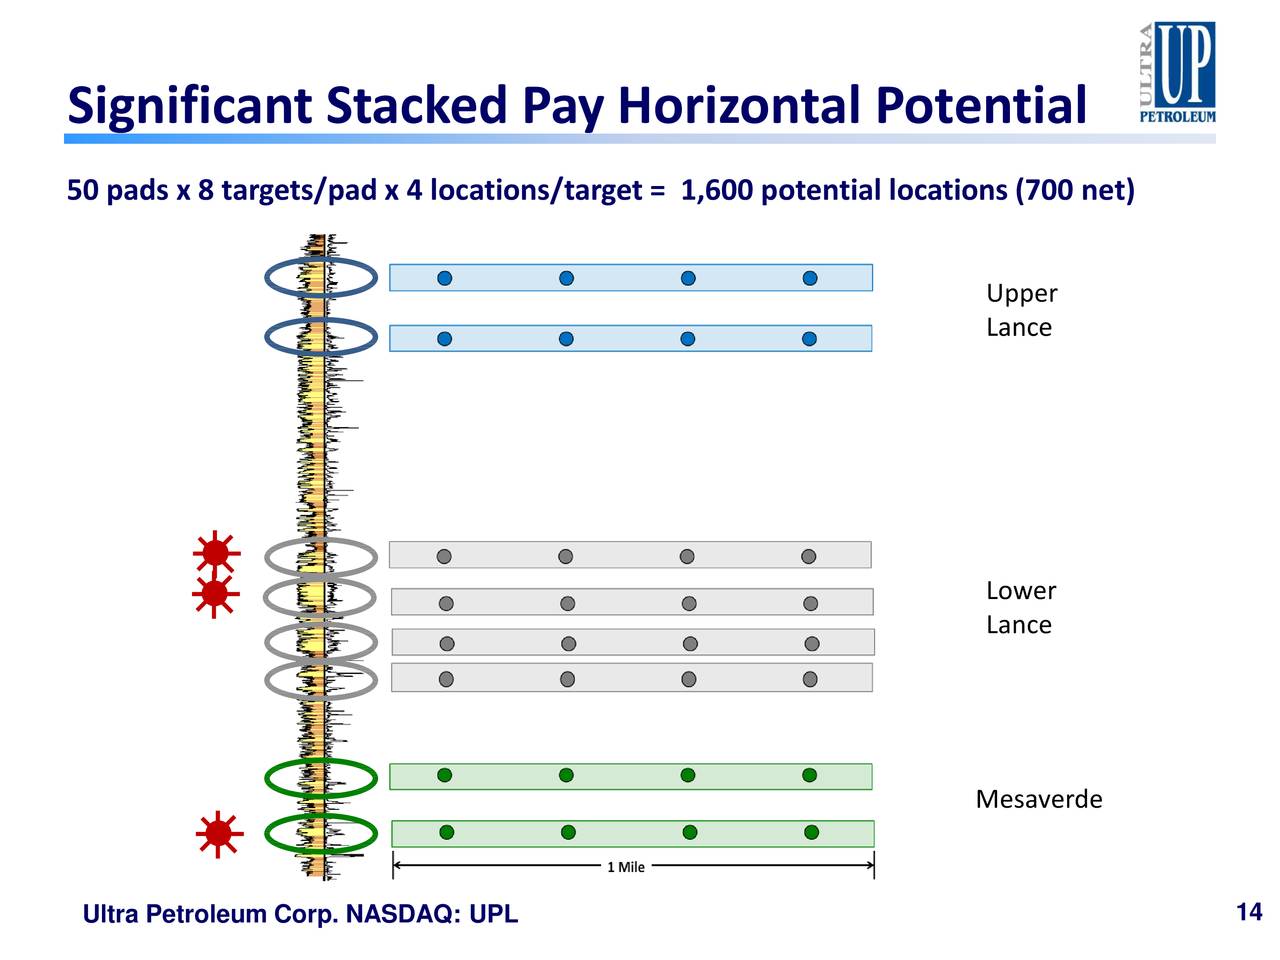 Significant Stacked Pay Horizontal Potential